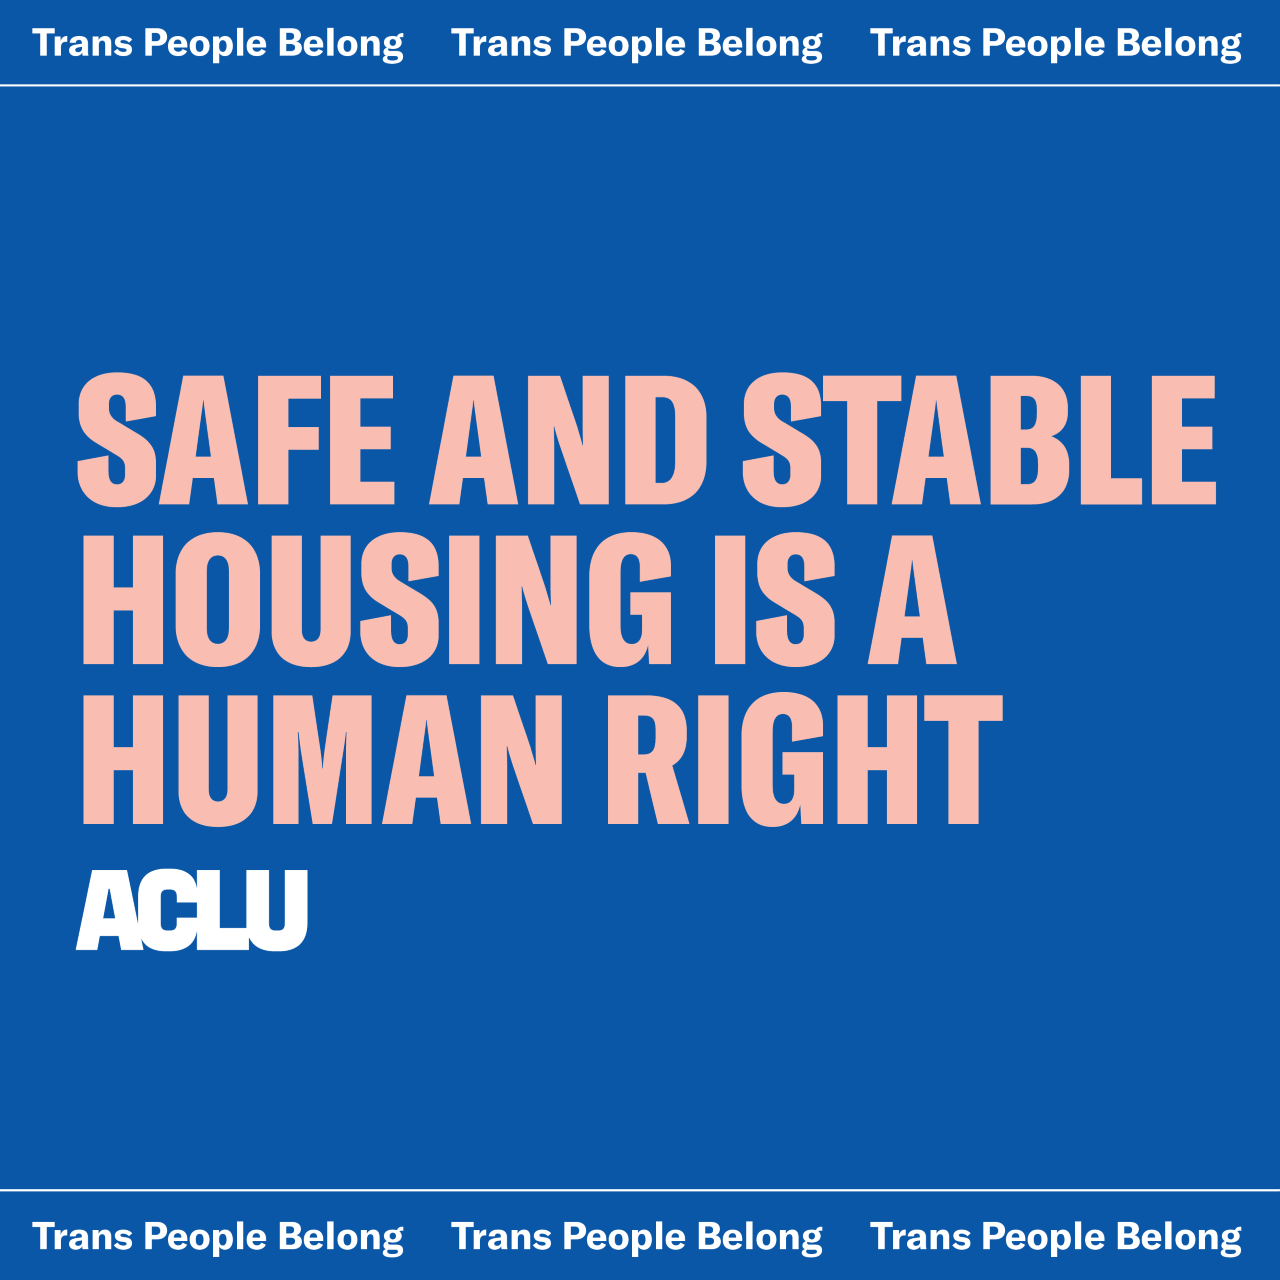 Blue background with light pink text that says "SAFE AND STABLE HOUSING IS A HUMAN RIGHT". There is a white ACLU logo in the bottom left corner and the top banner says "Trans People Belong" in white text. 